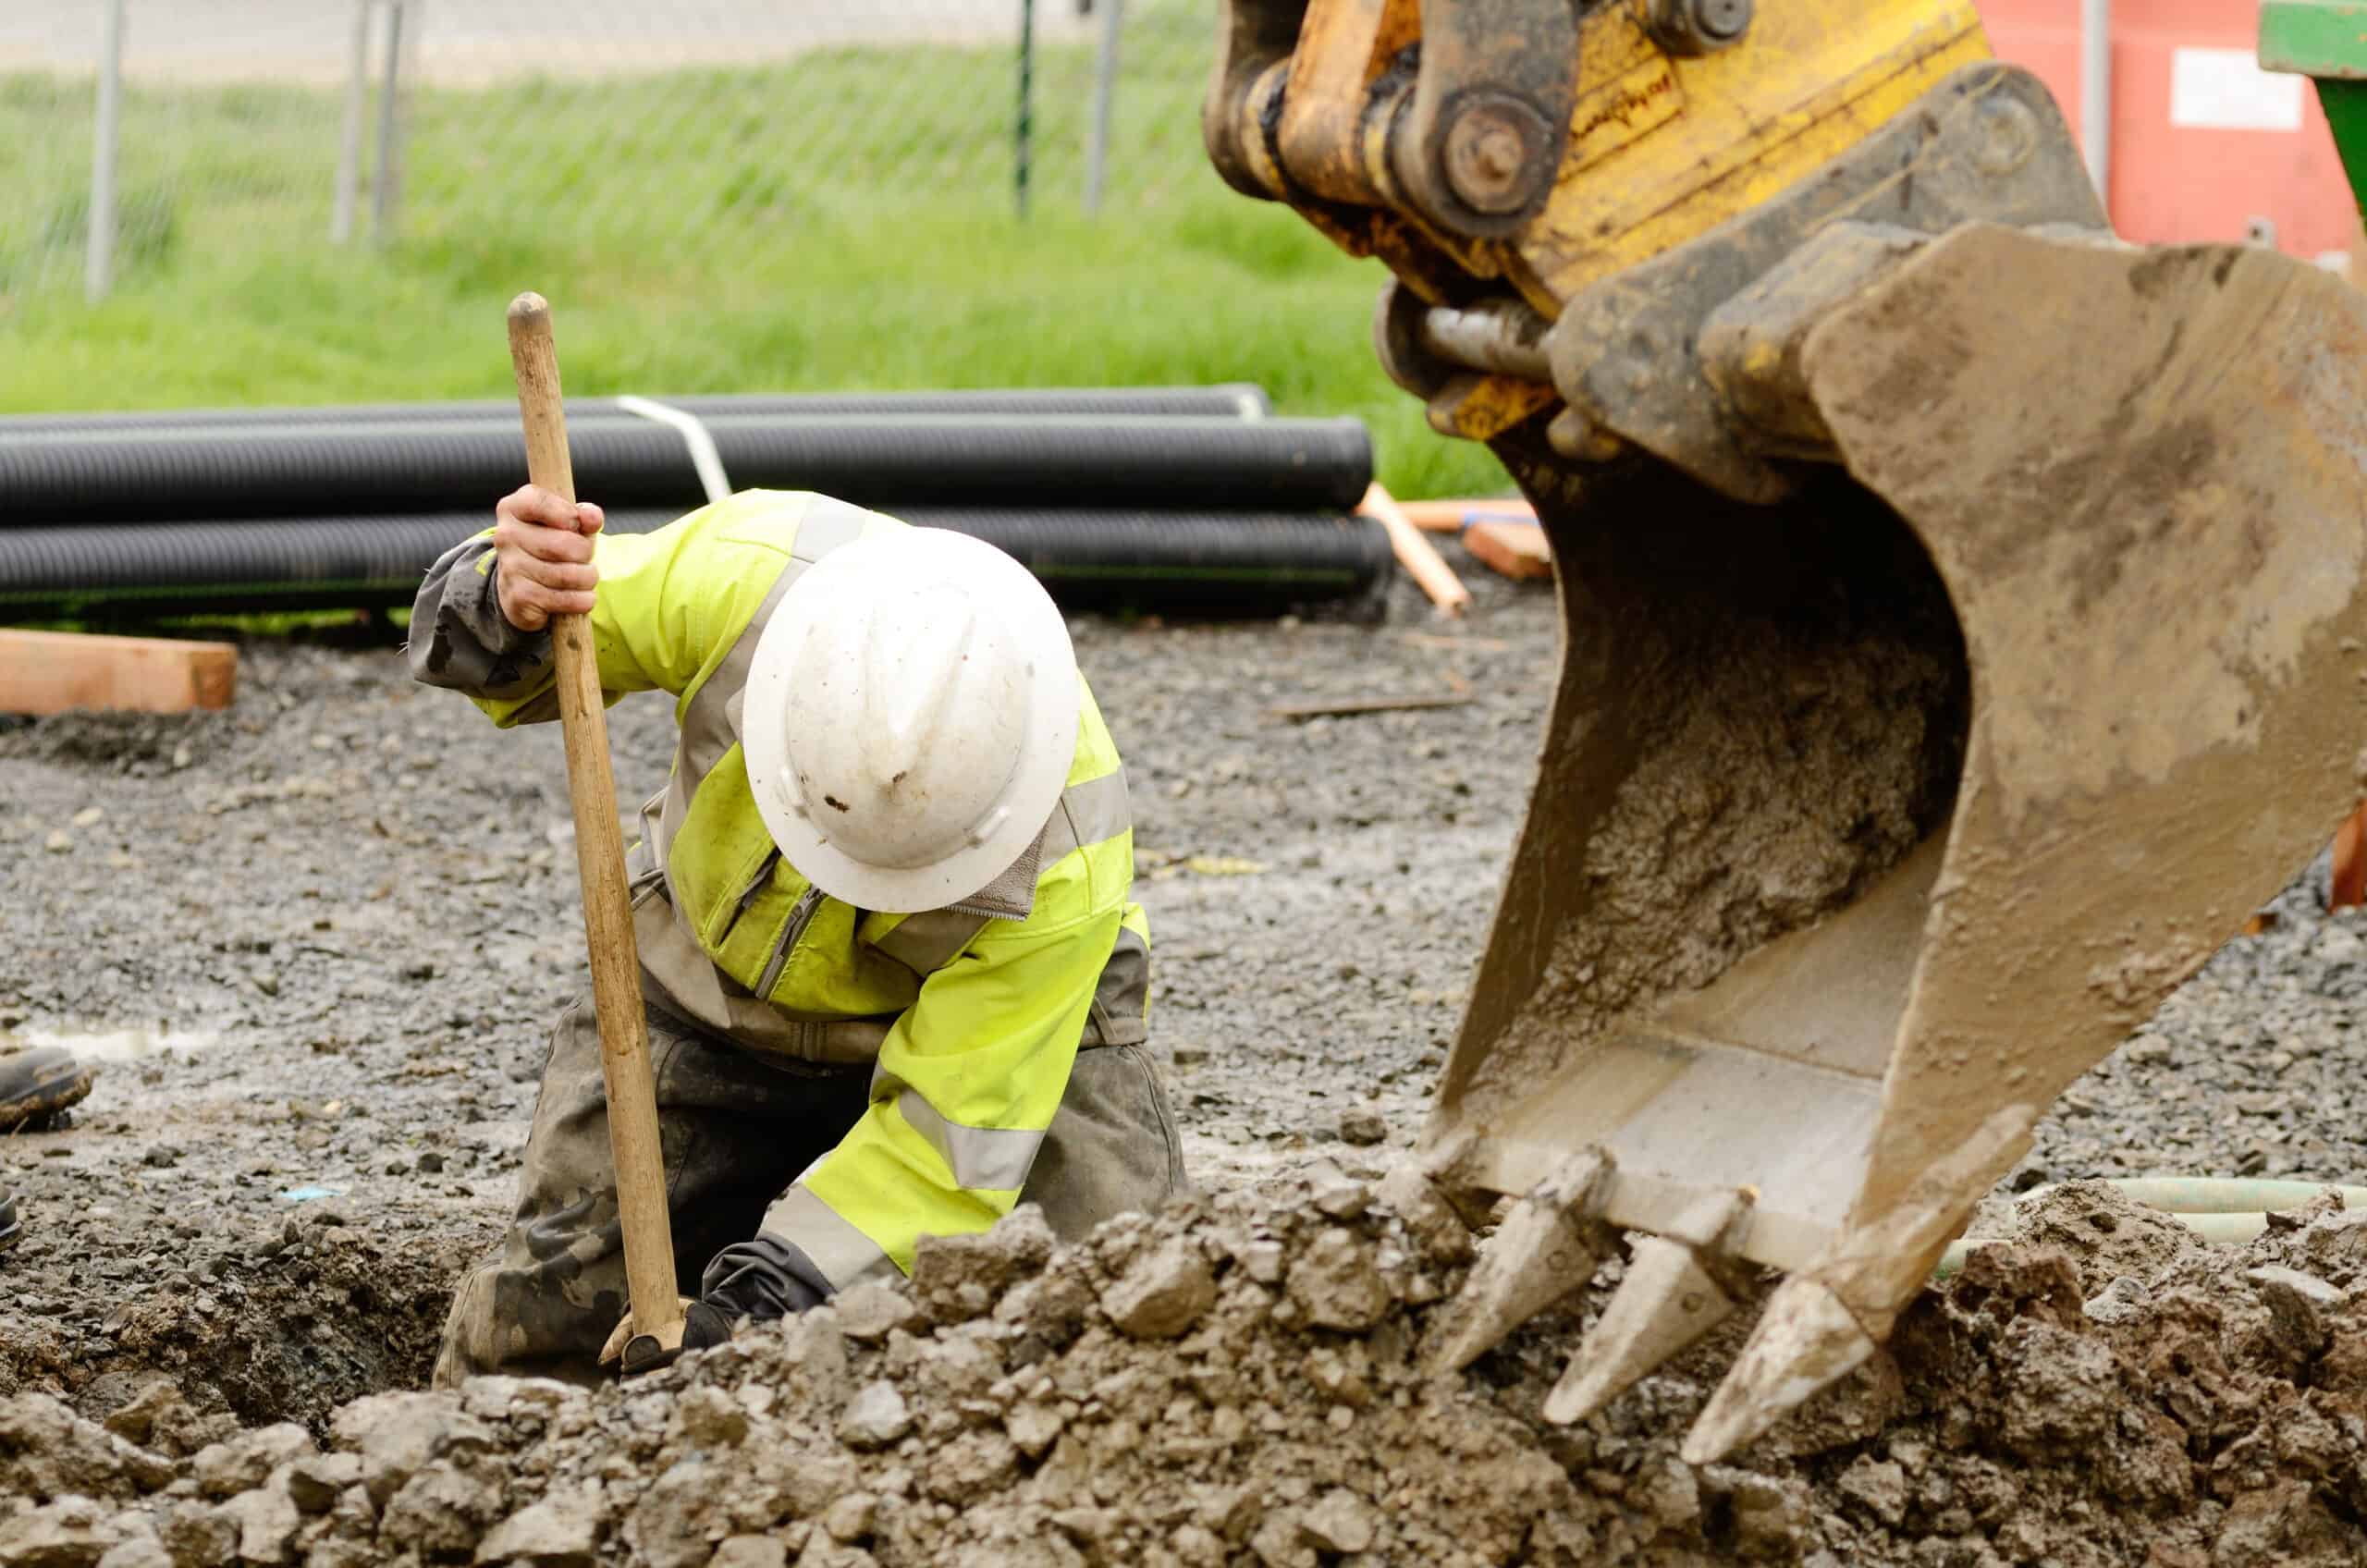 Lead service line Worker using an excavator to dig a hole to replace a lead water main